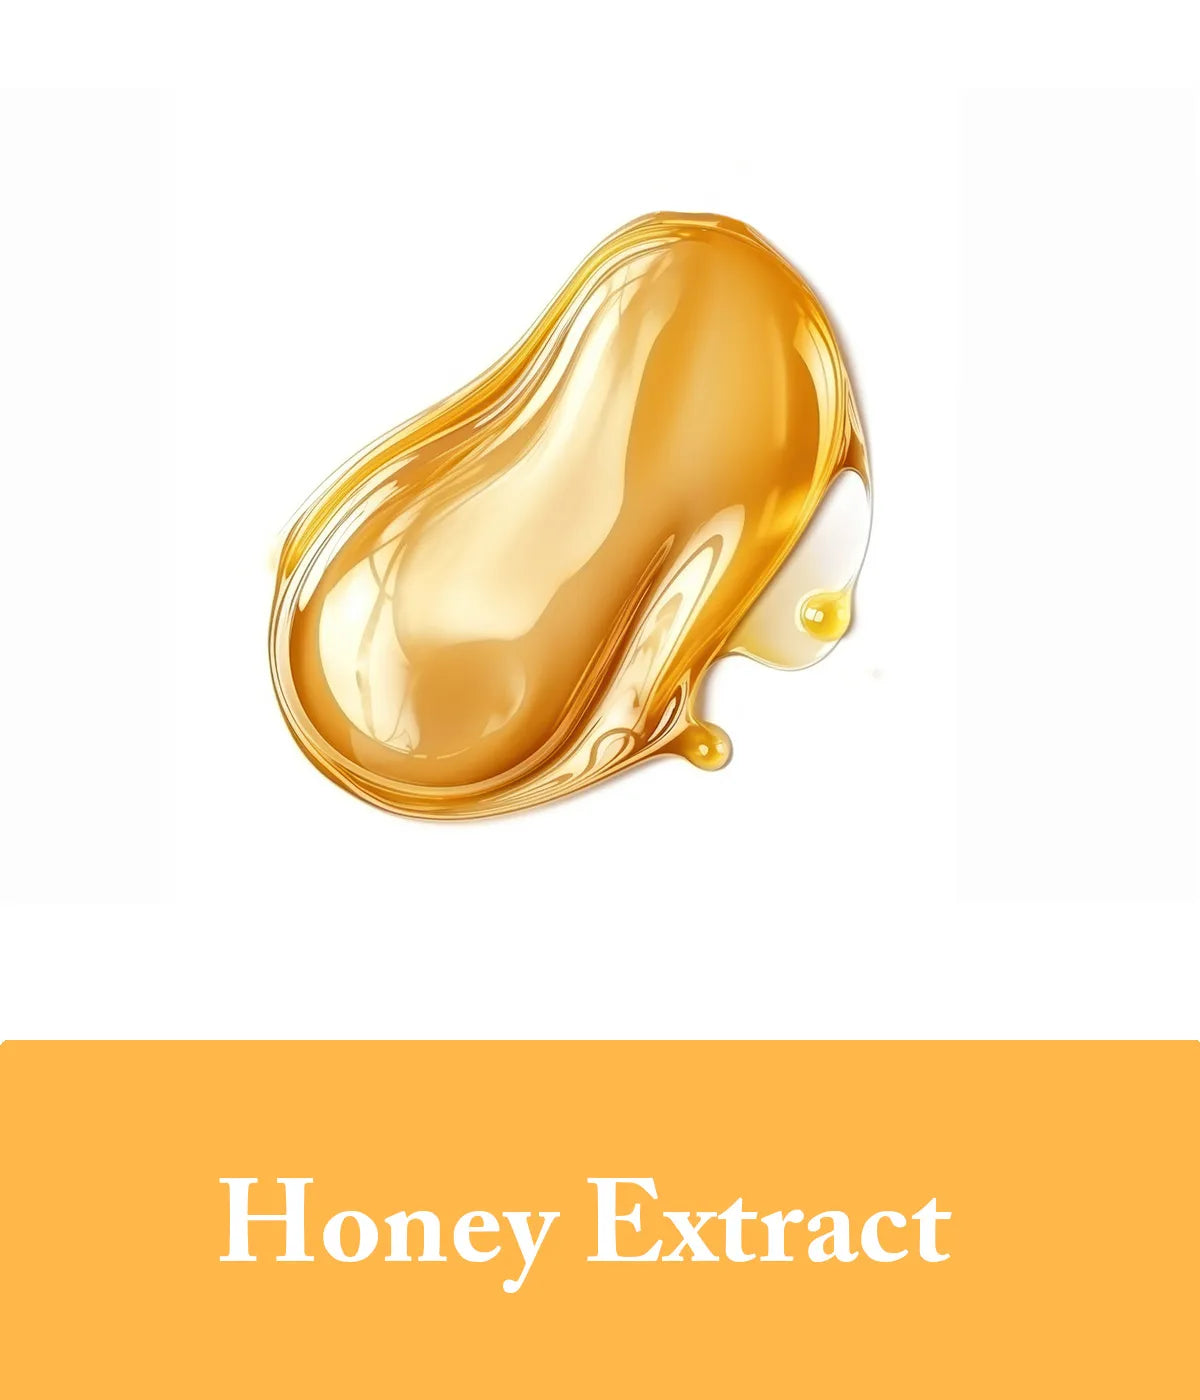 Close-up image of pure honey extract, a key natural ingredient in our honey shampoo for nourishing hair.